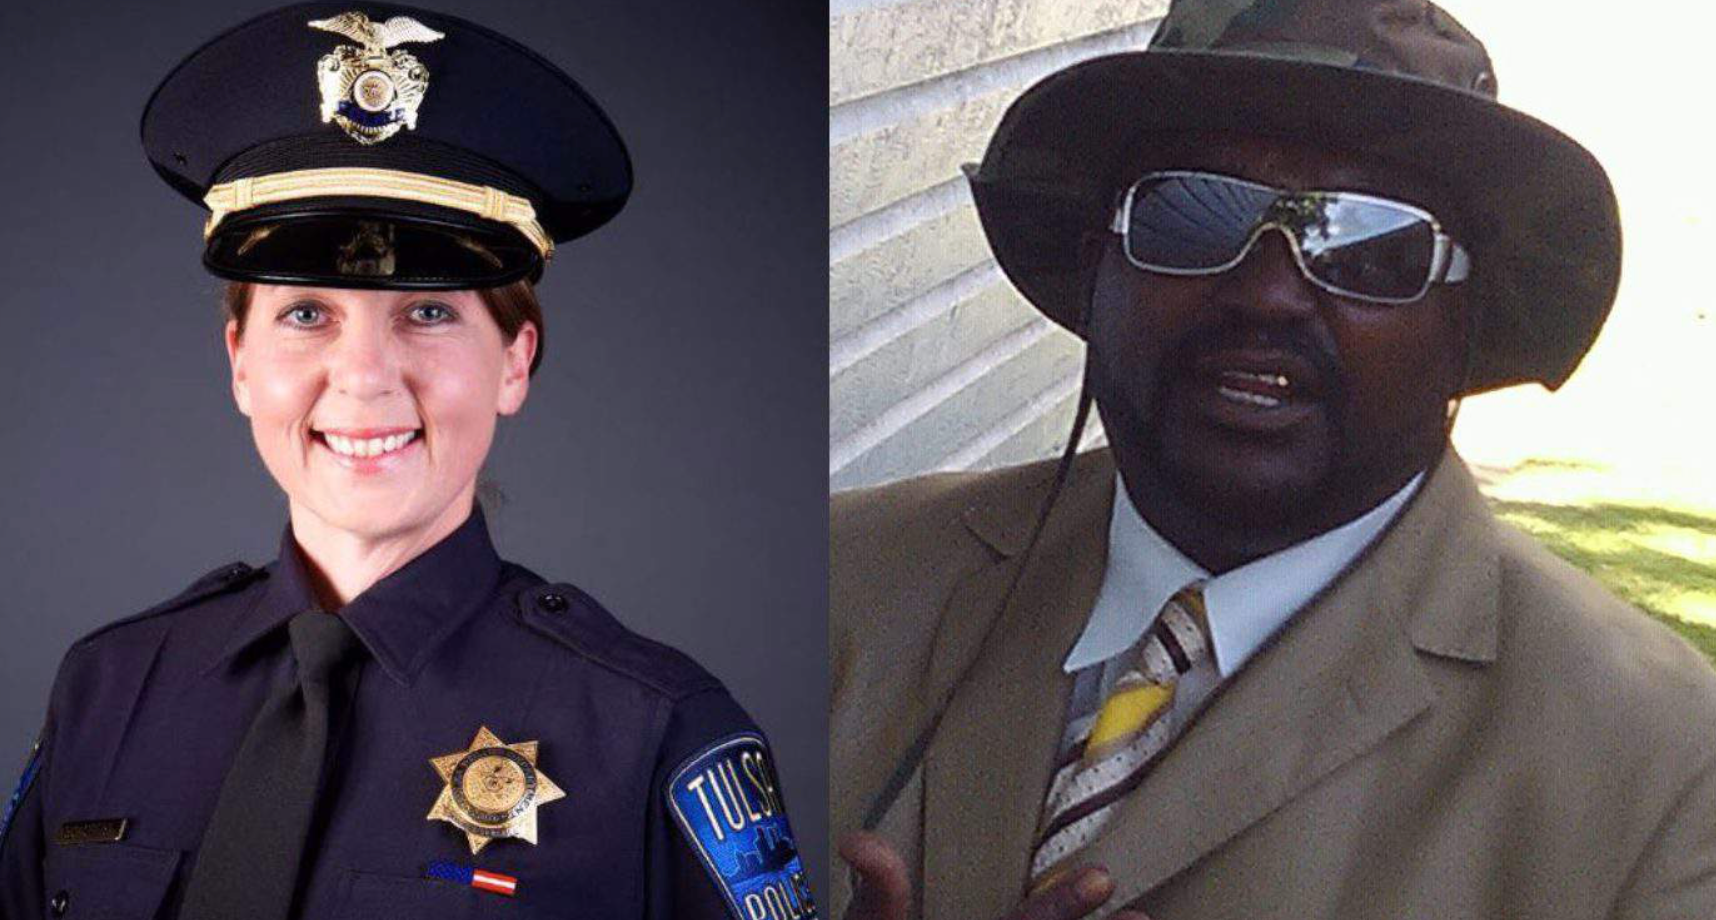 Black, Unarmed & In Need Of Help: Why Did Tulsa Police Fatally Shoot Terence Crutcher?